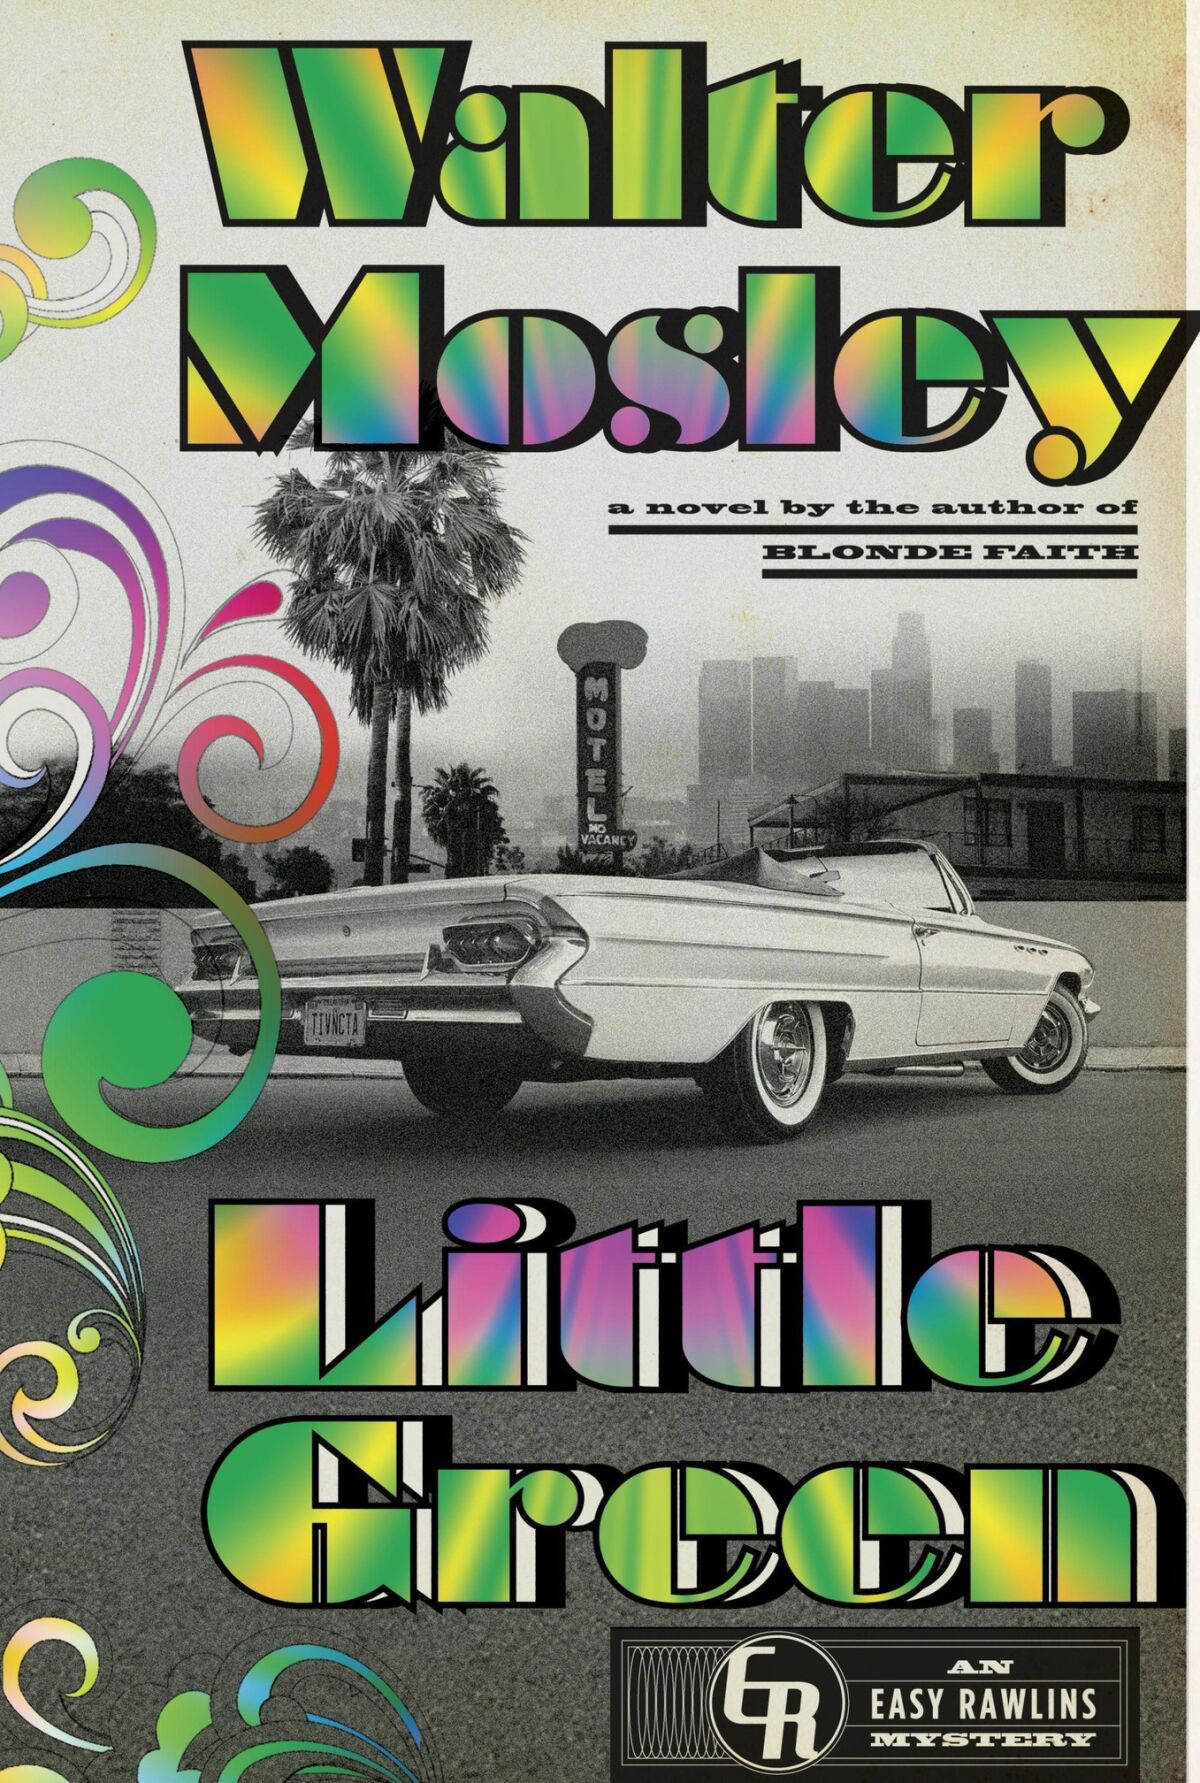 Book jacket for "Little Green," part of Walter Mosley's Easy Rawlins series.